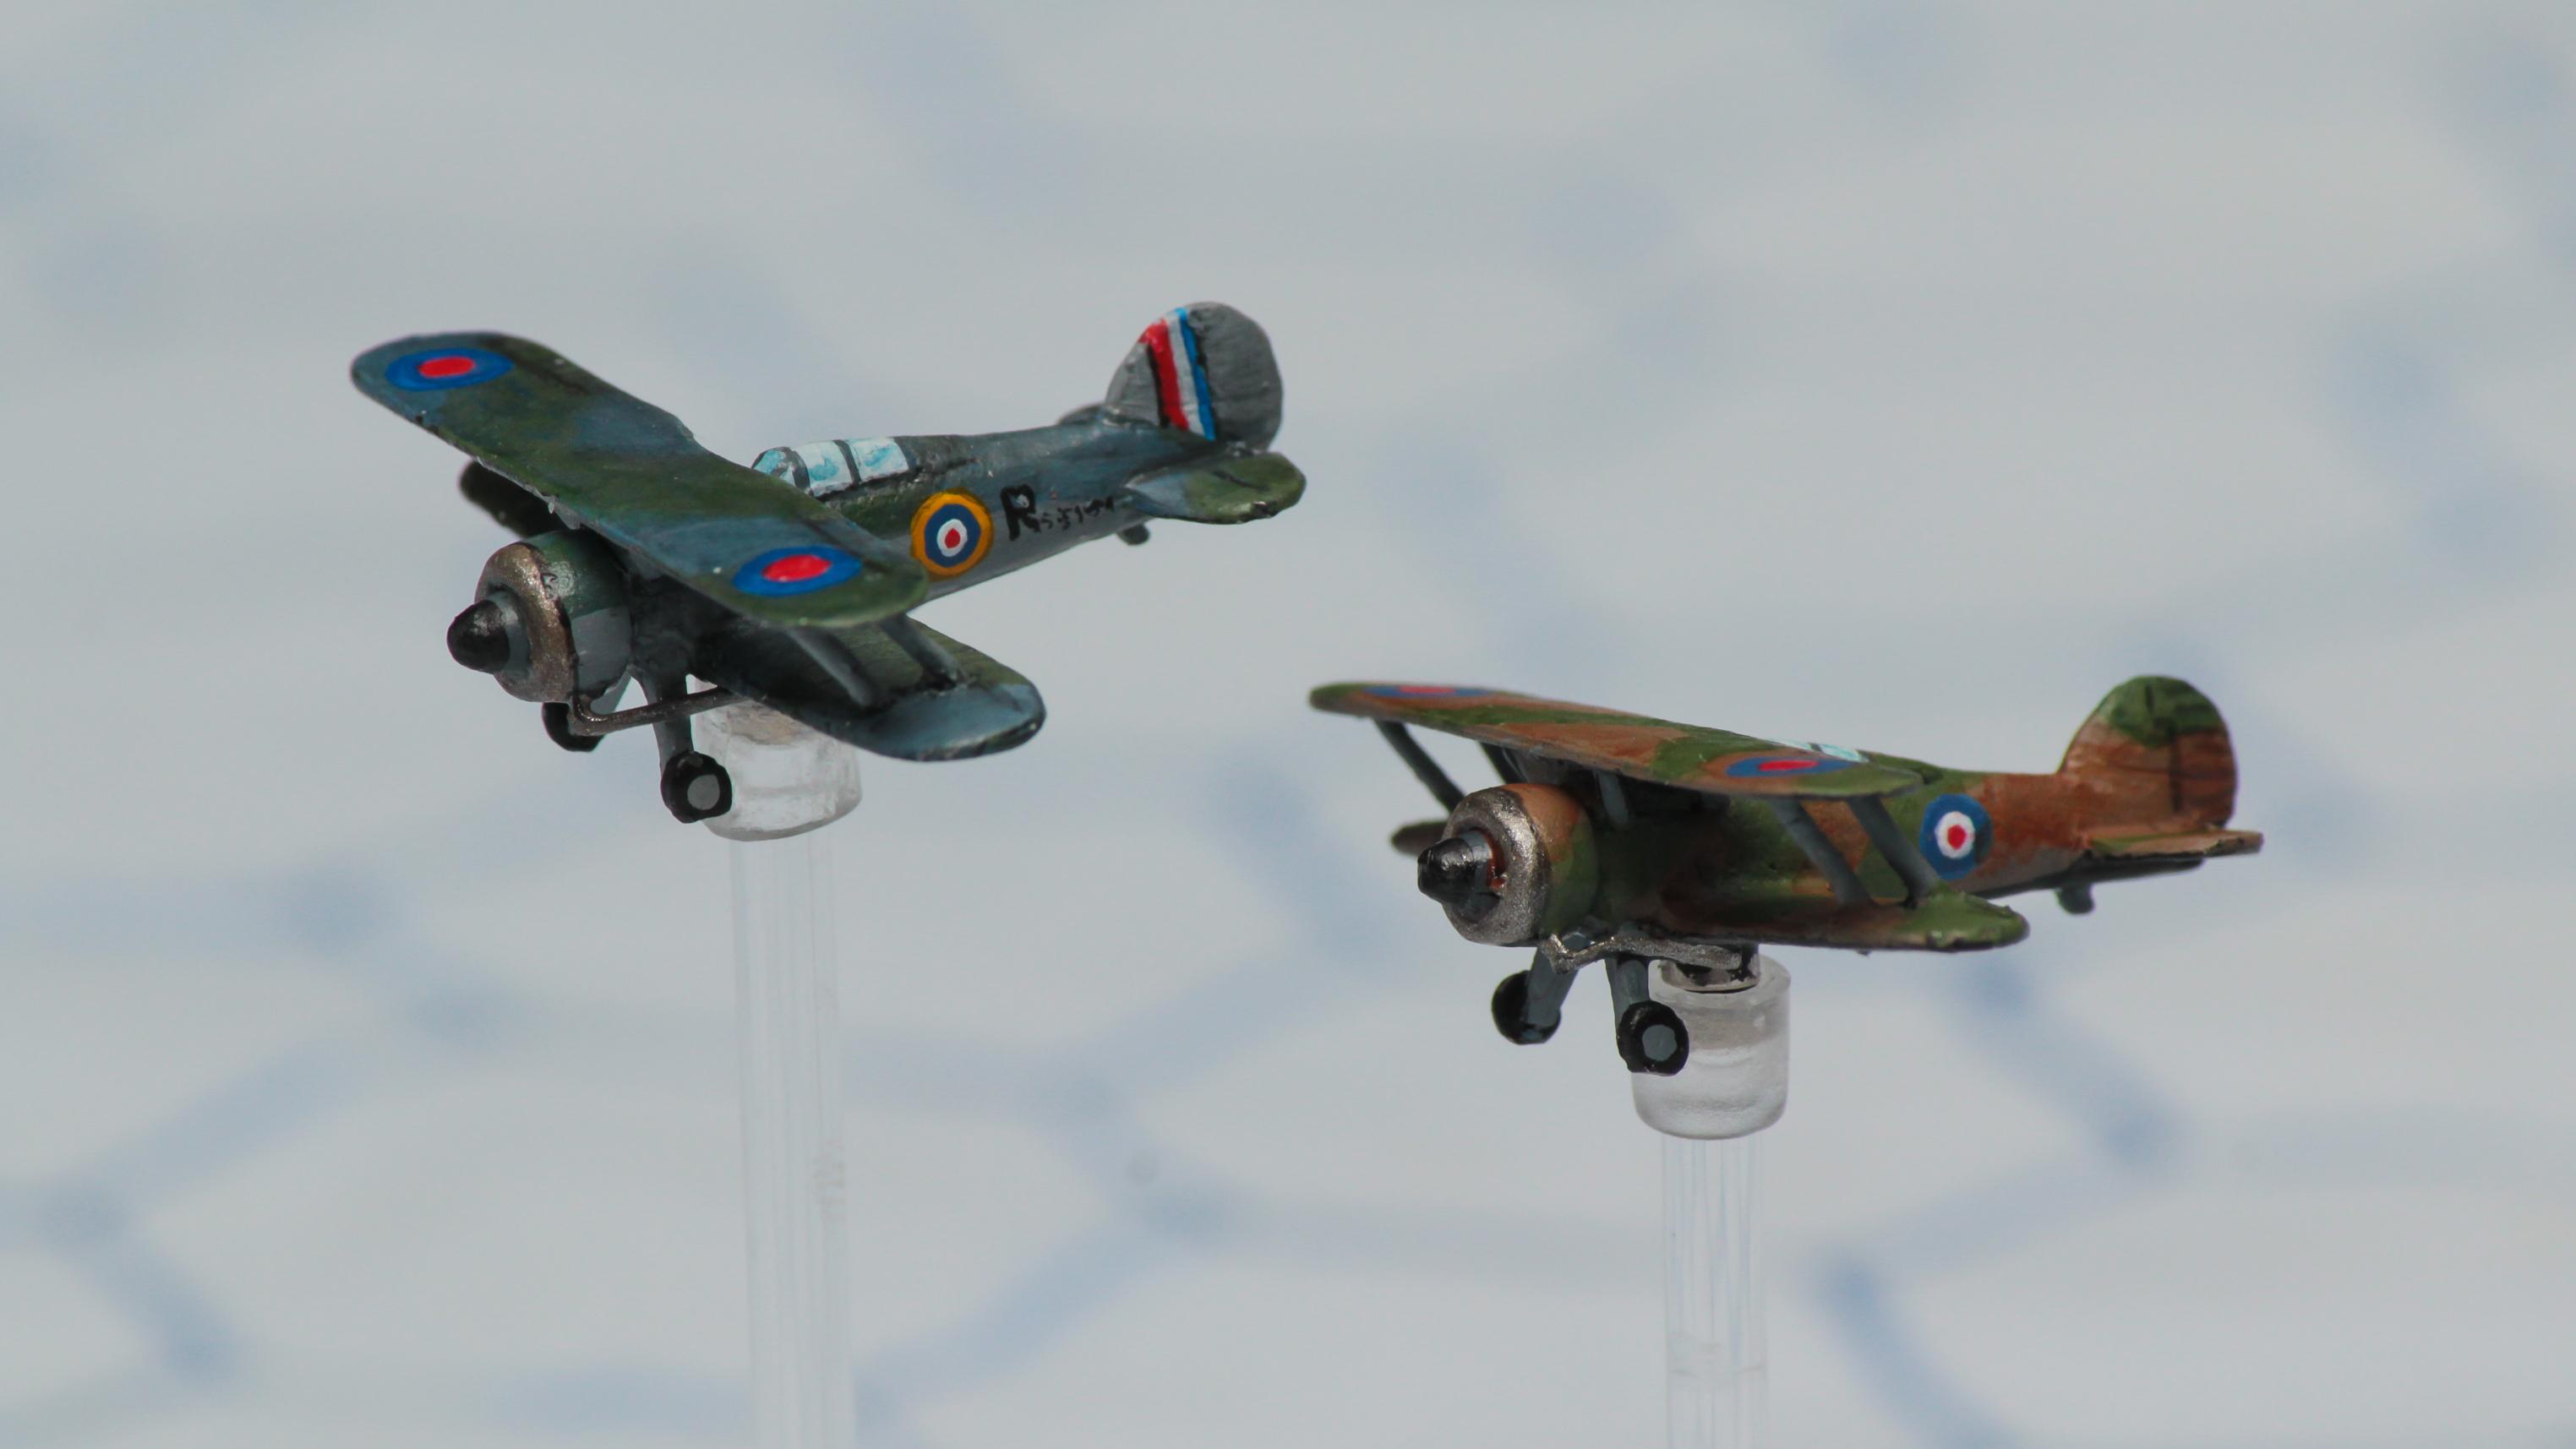 1:300 Scale, 6mm Scale, Air, Air Combat, Aircraft, Aviation, Fliers, Historical, Planes, Raf, World War 2